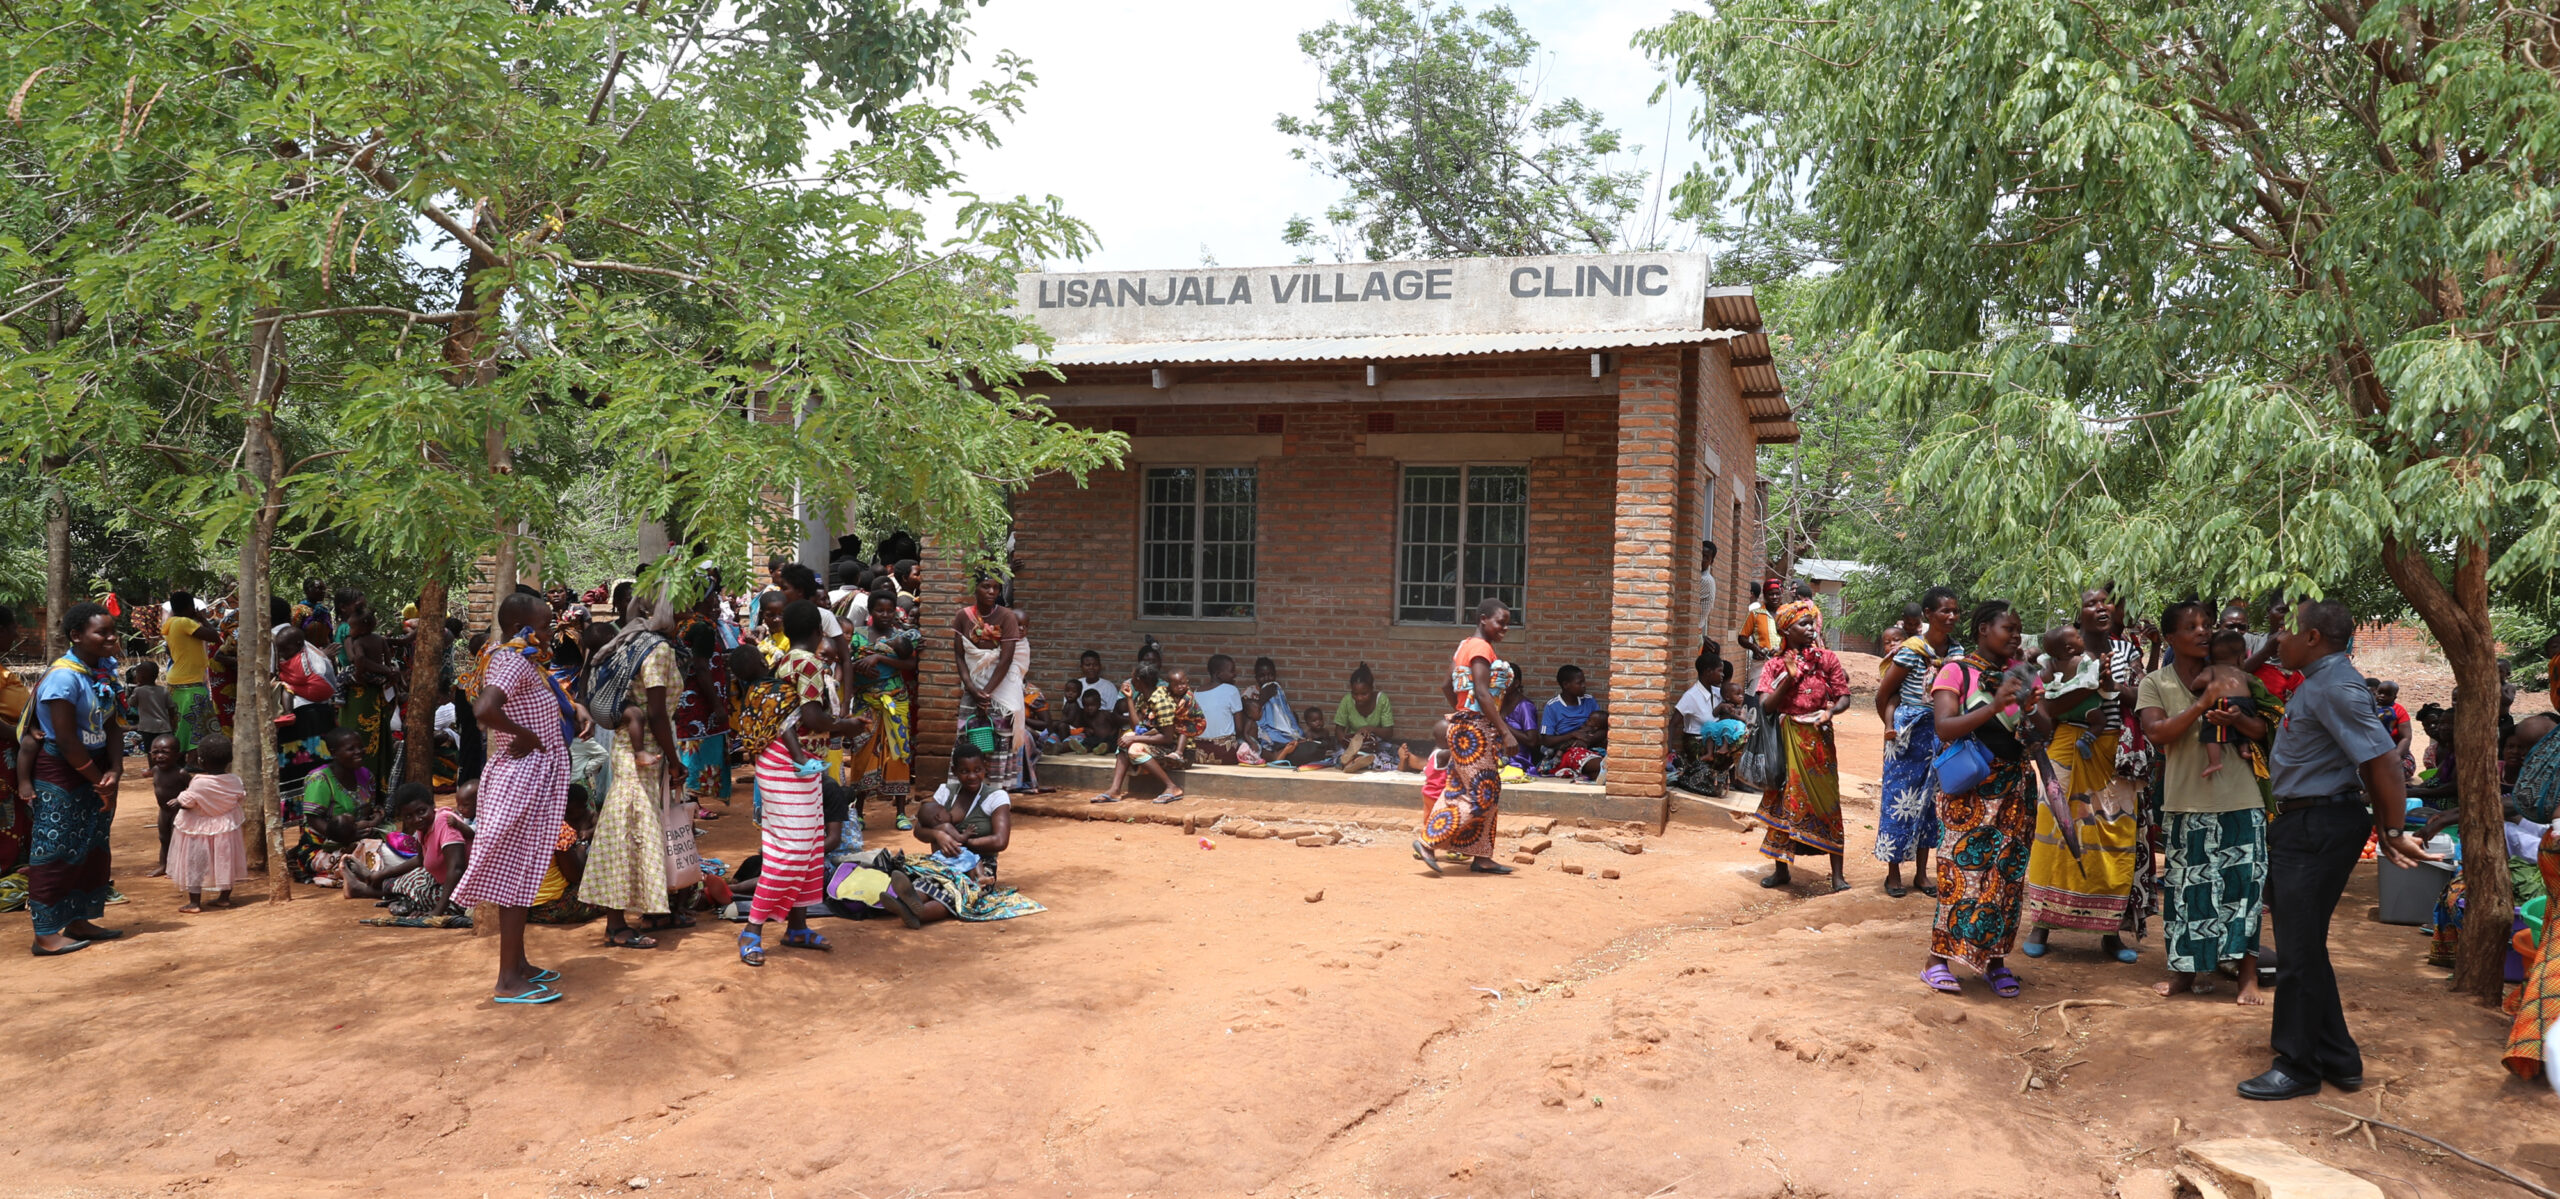 Mothers waiting for their sick children to be seen at Lisanjala Health Clinic in Malawi